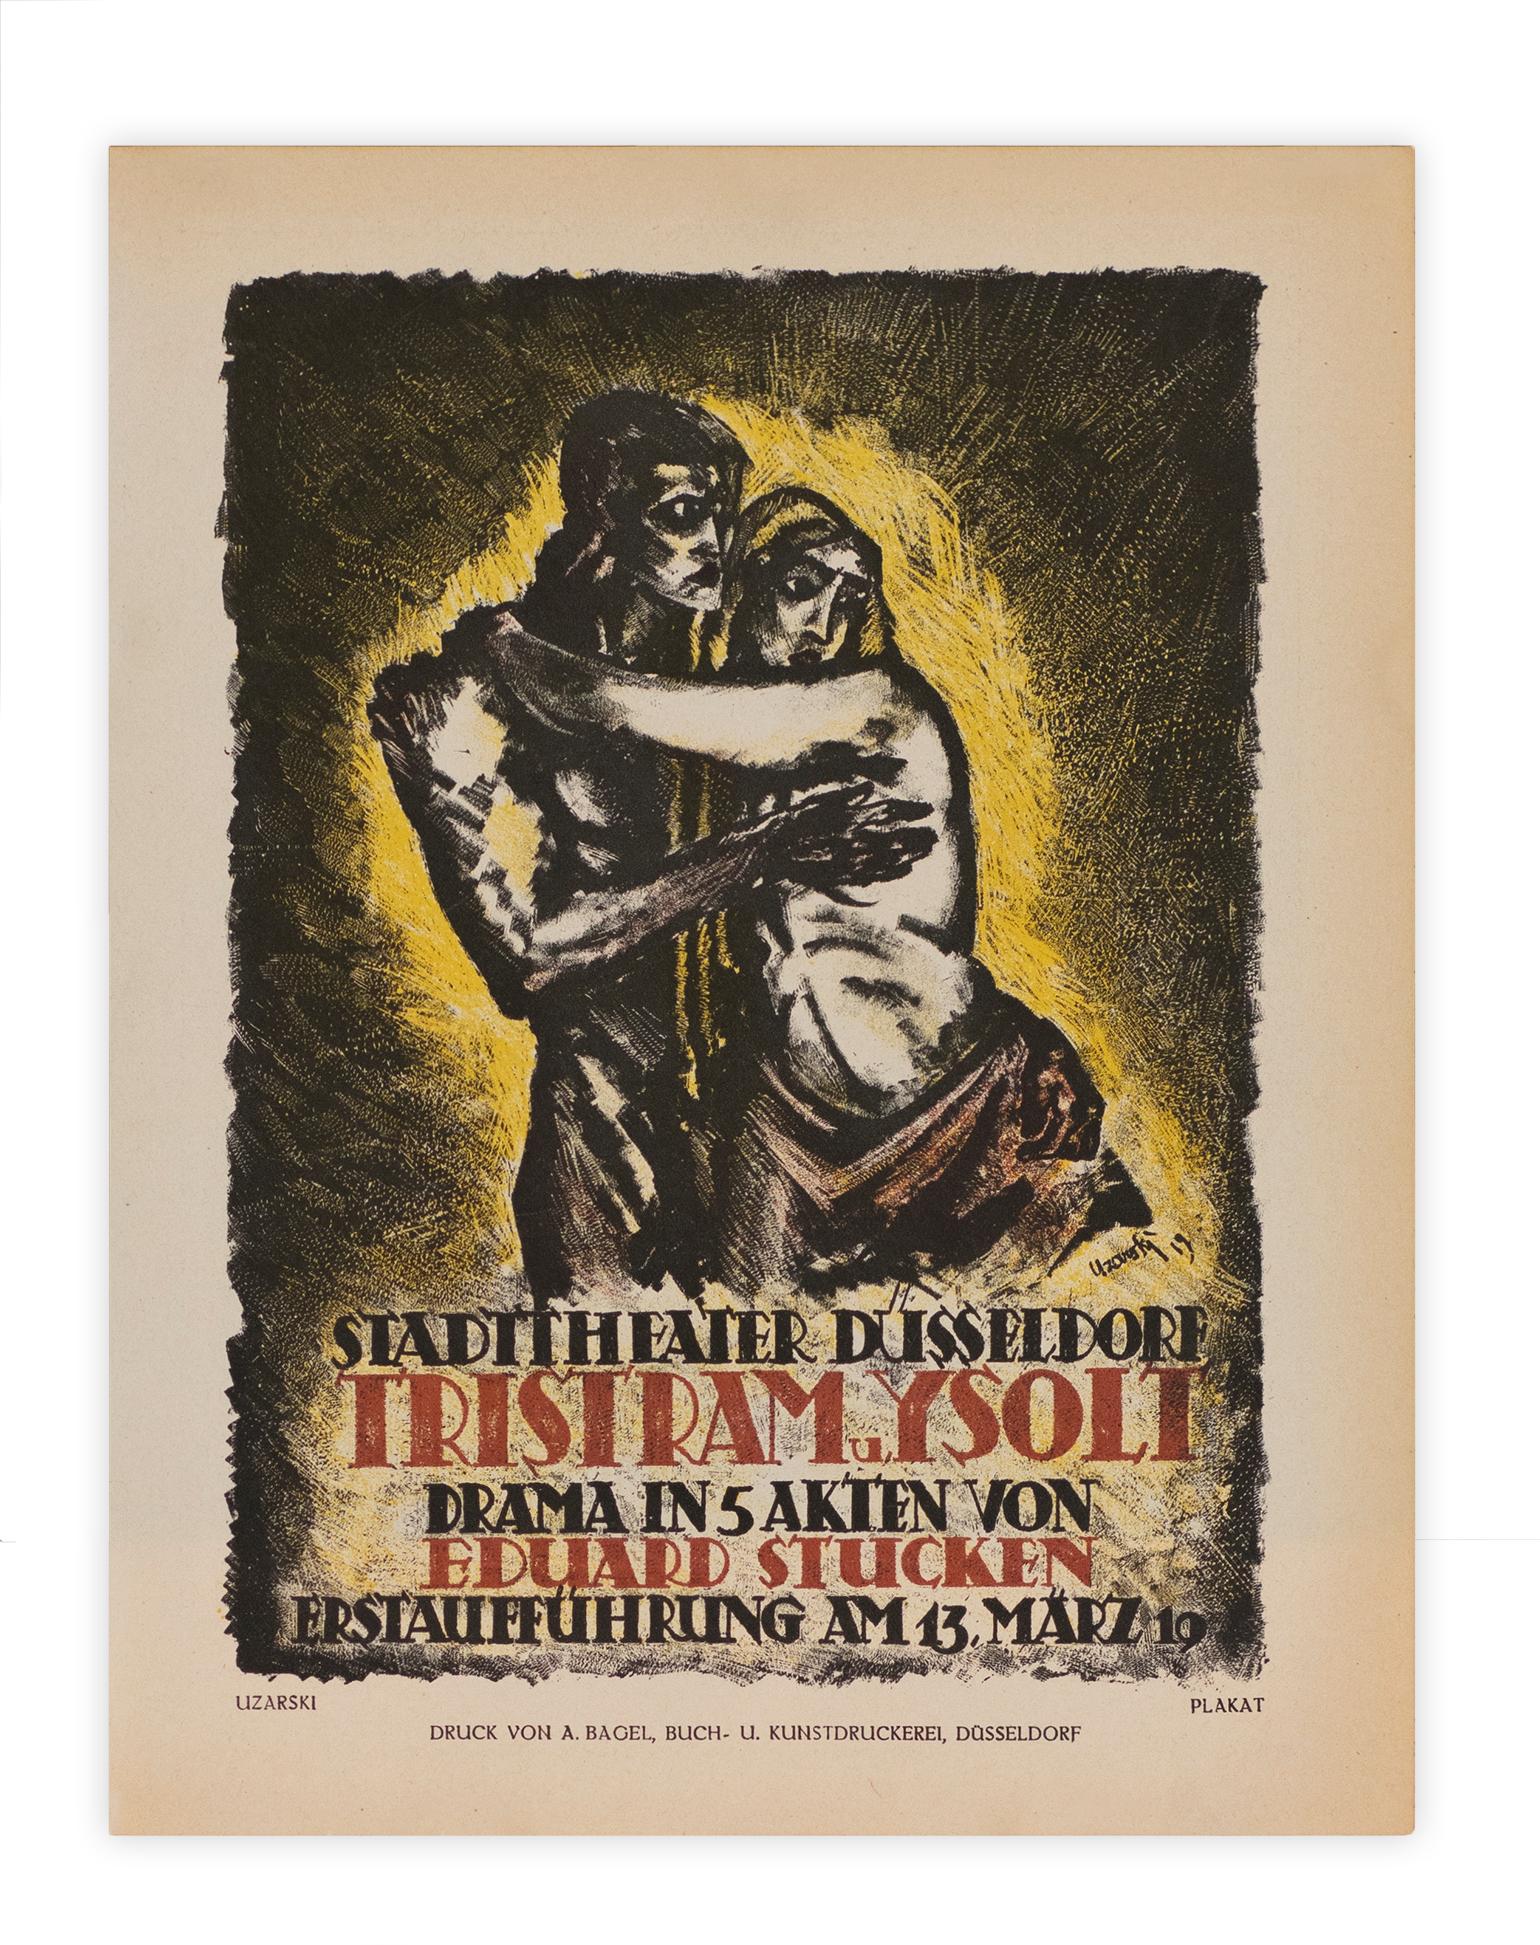 Tristram and Ysoli, Düsseldorf state-theatre, Expressionist stage lithograph